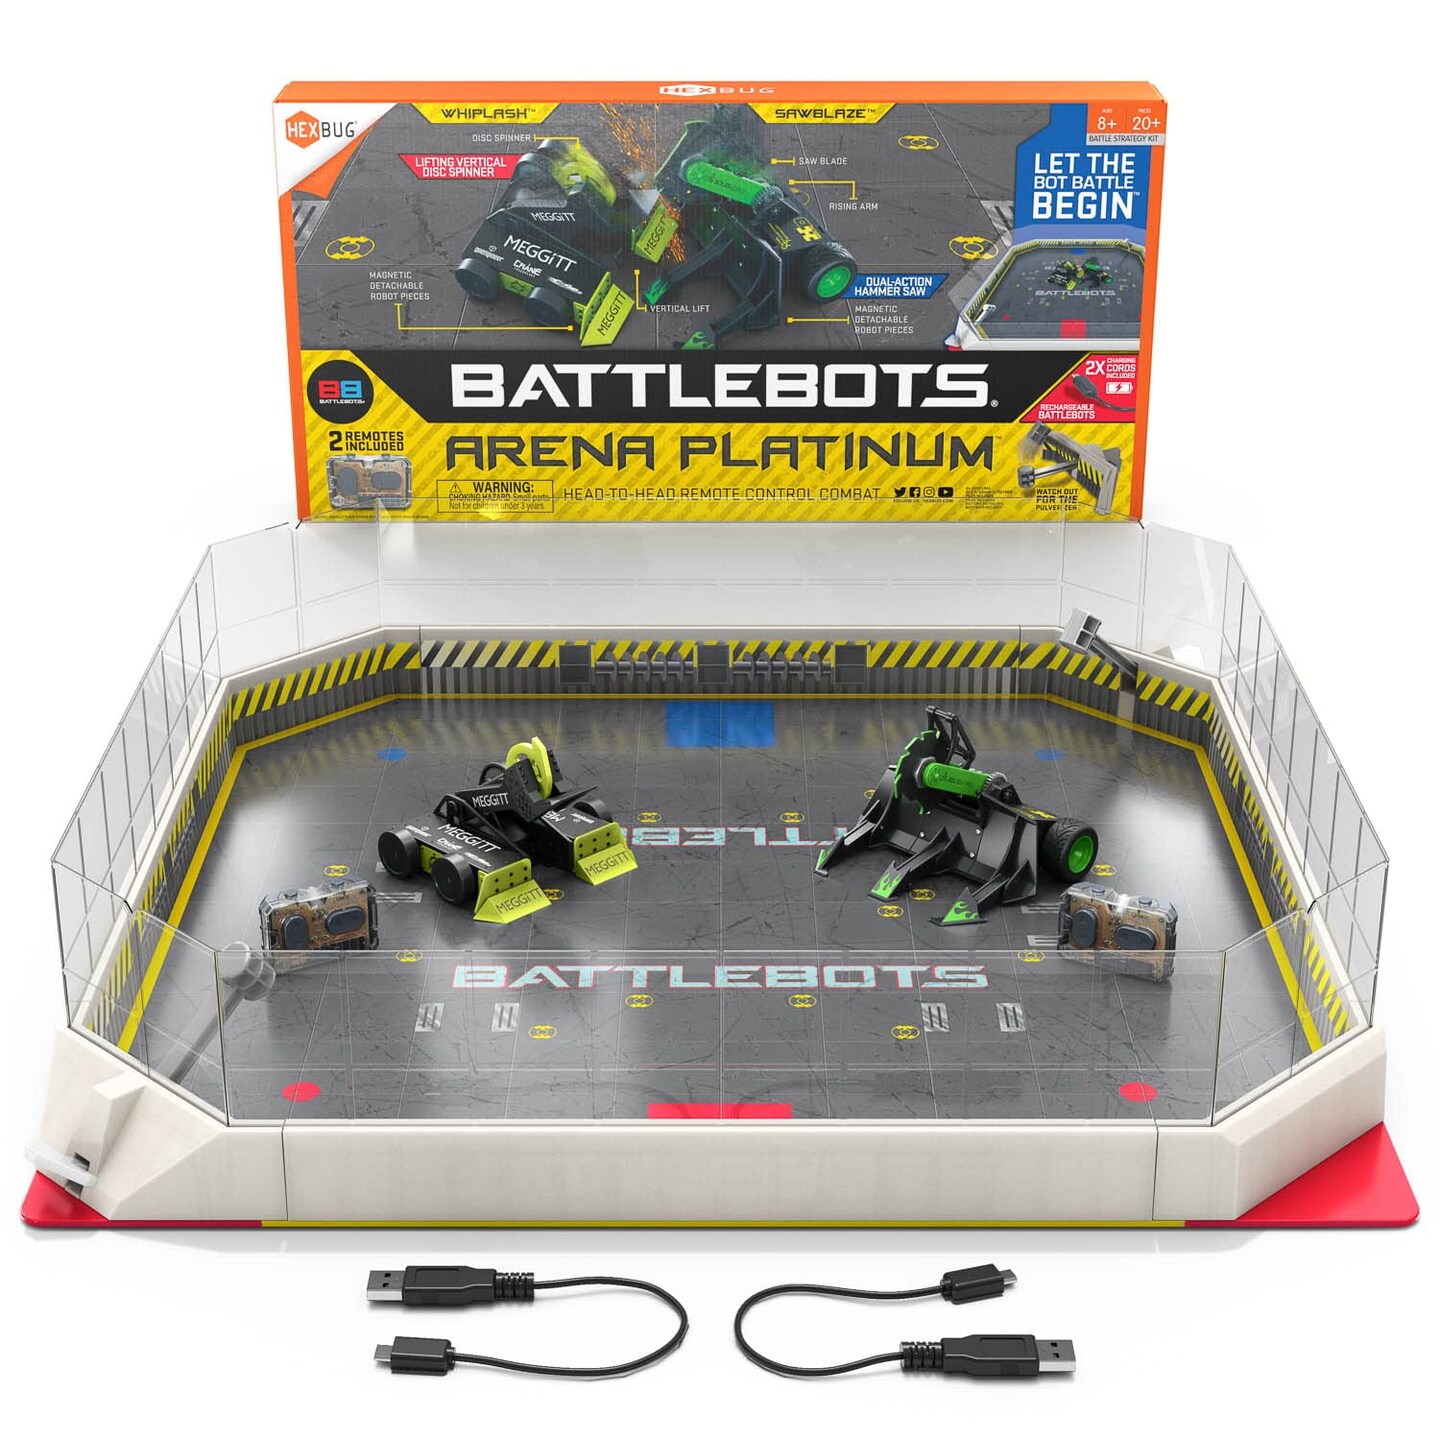 HEXBUG BattleBots Arena Platinum - Multiplayer Remote Control Robot Toy for Kids - for Boys and Girls Ages 8 and Up